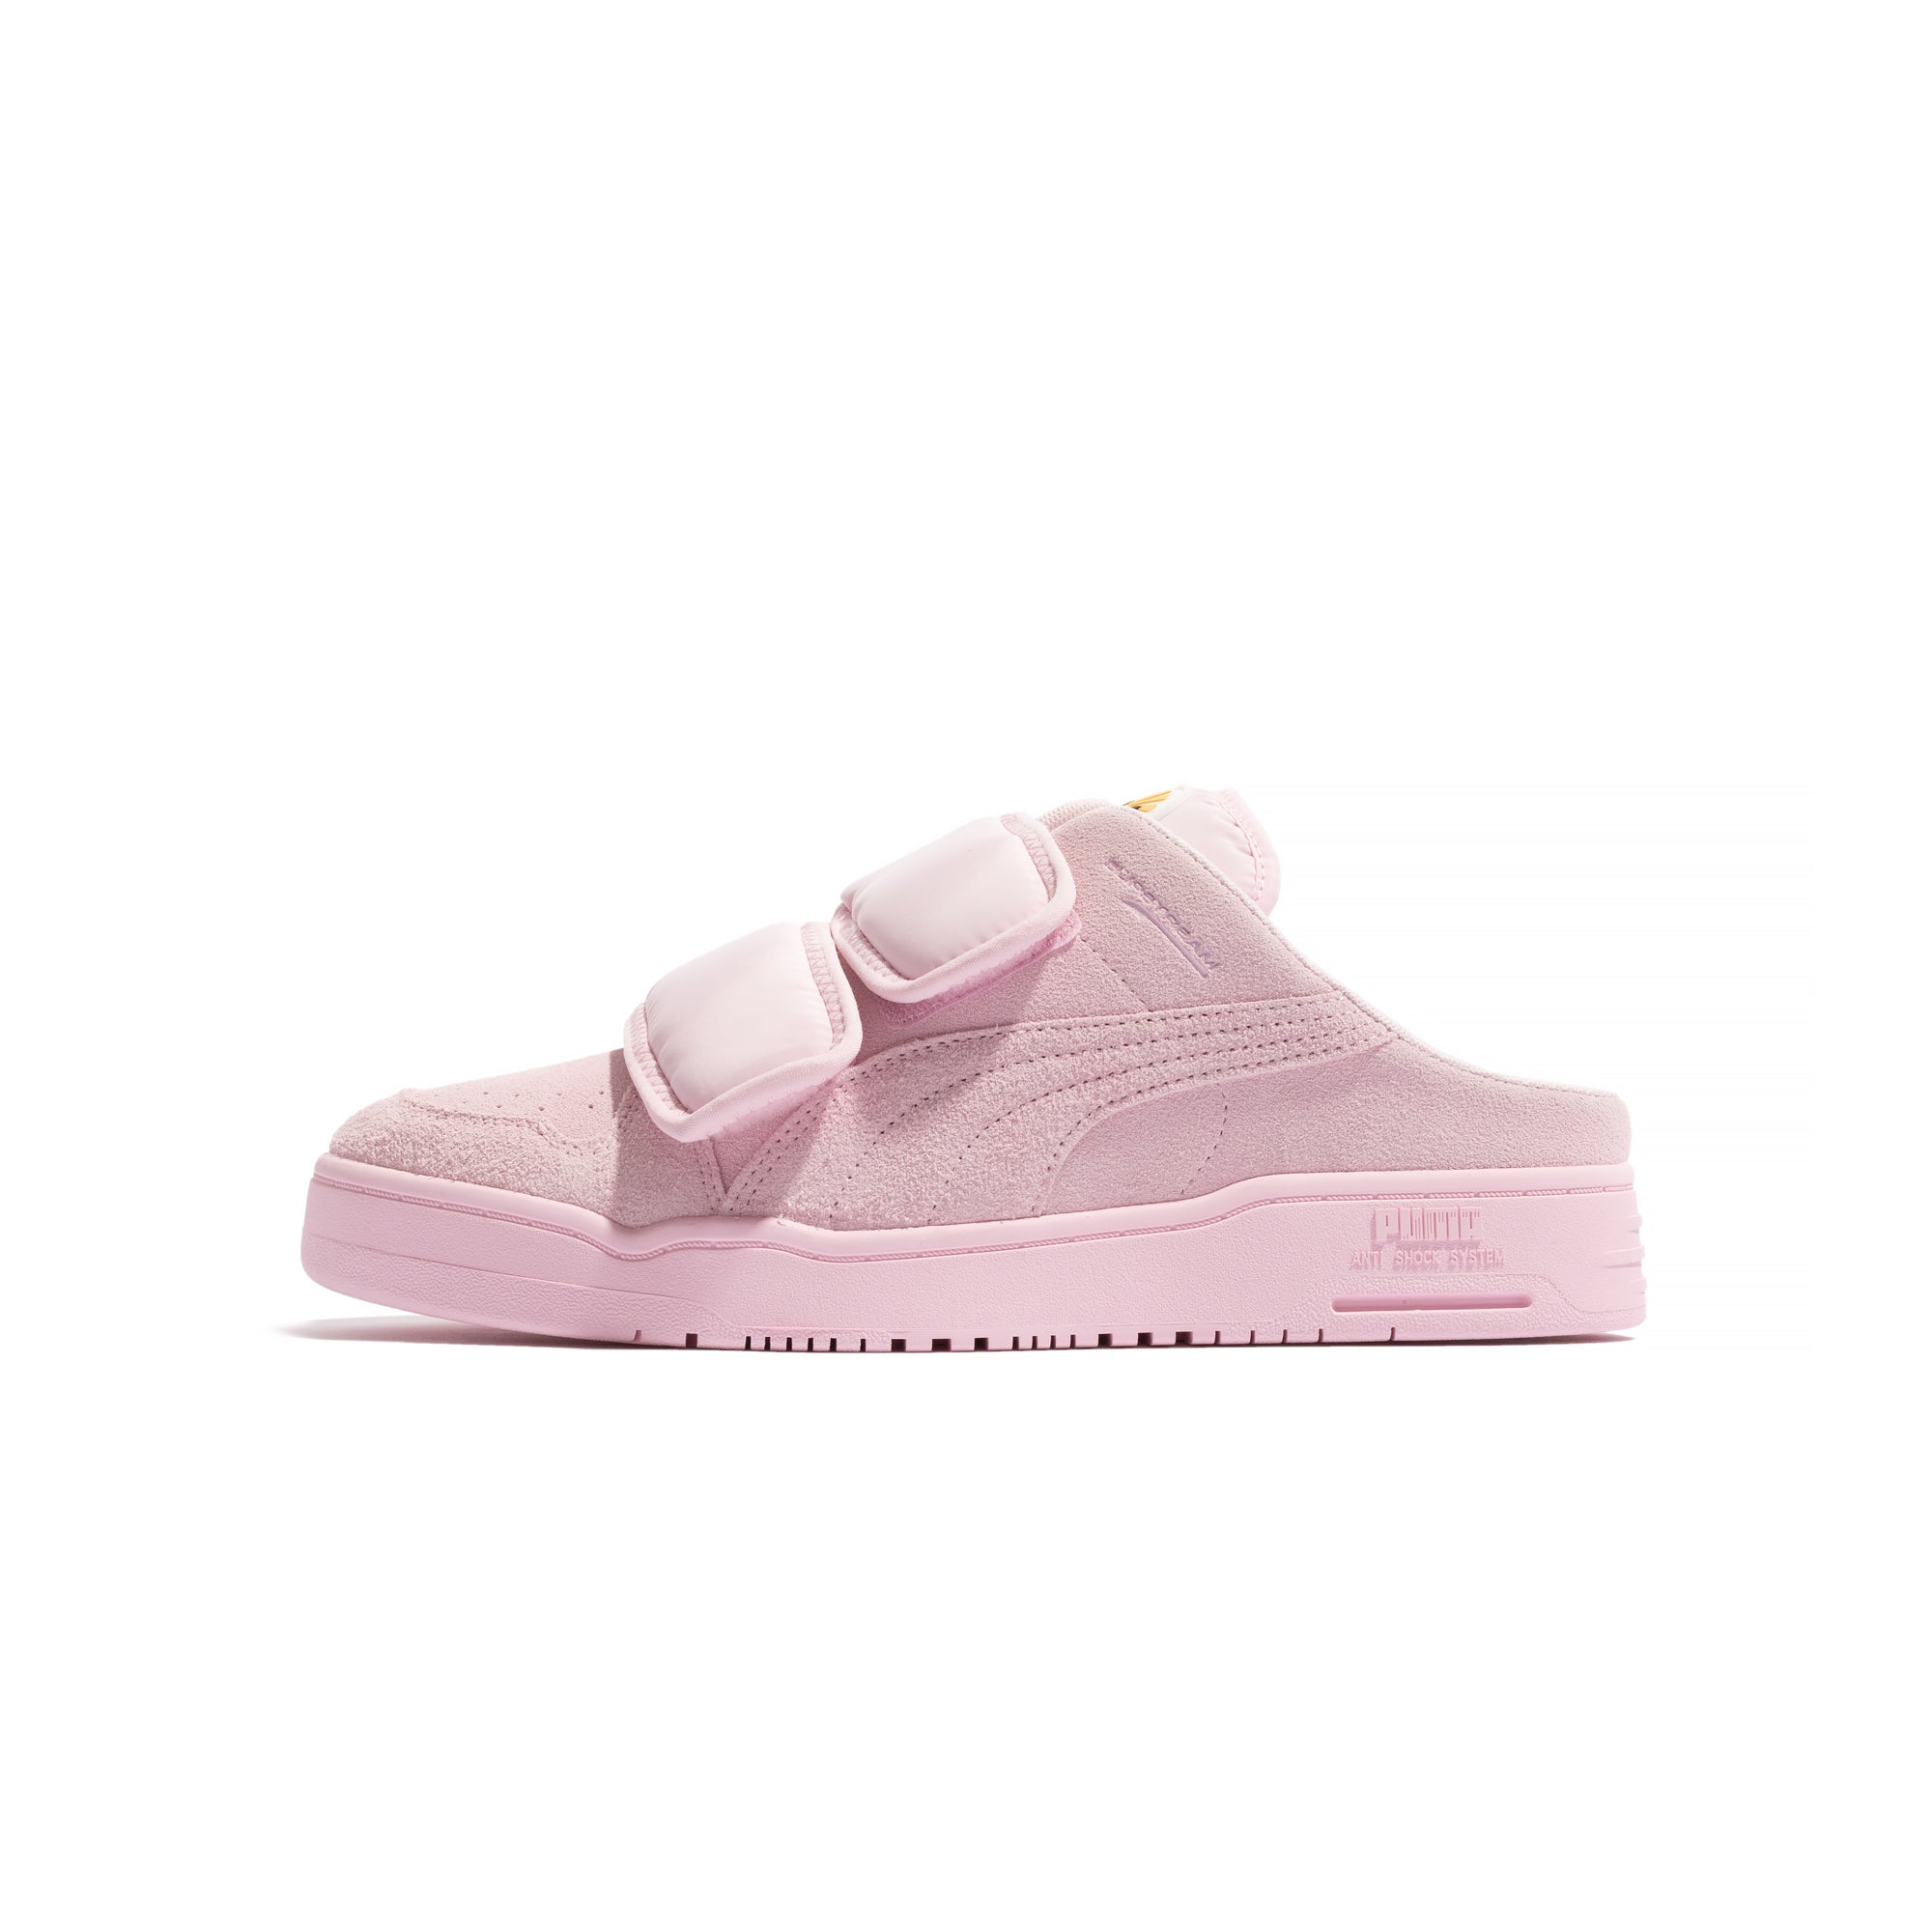 Classic Puma Suede pink sneakers.  Chaussure puma homme, Chaussures de  sport puma, Sneakers